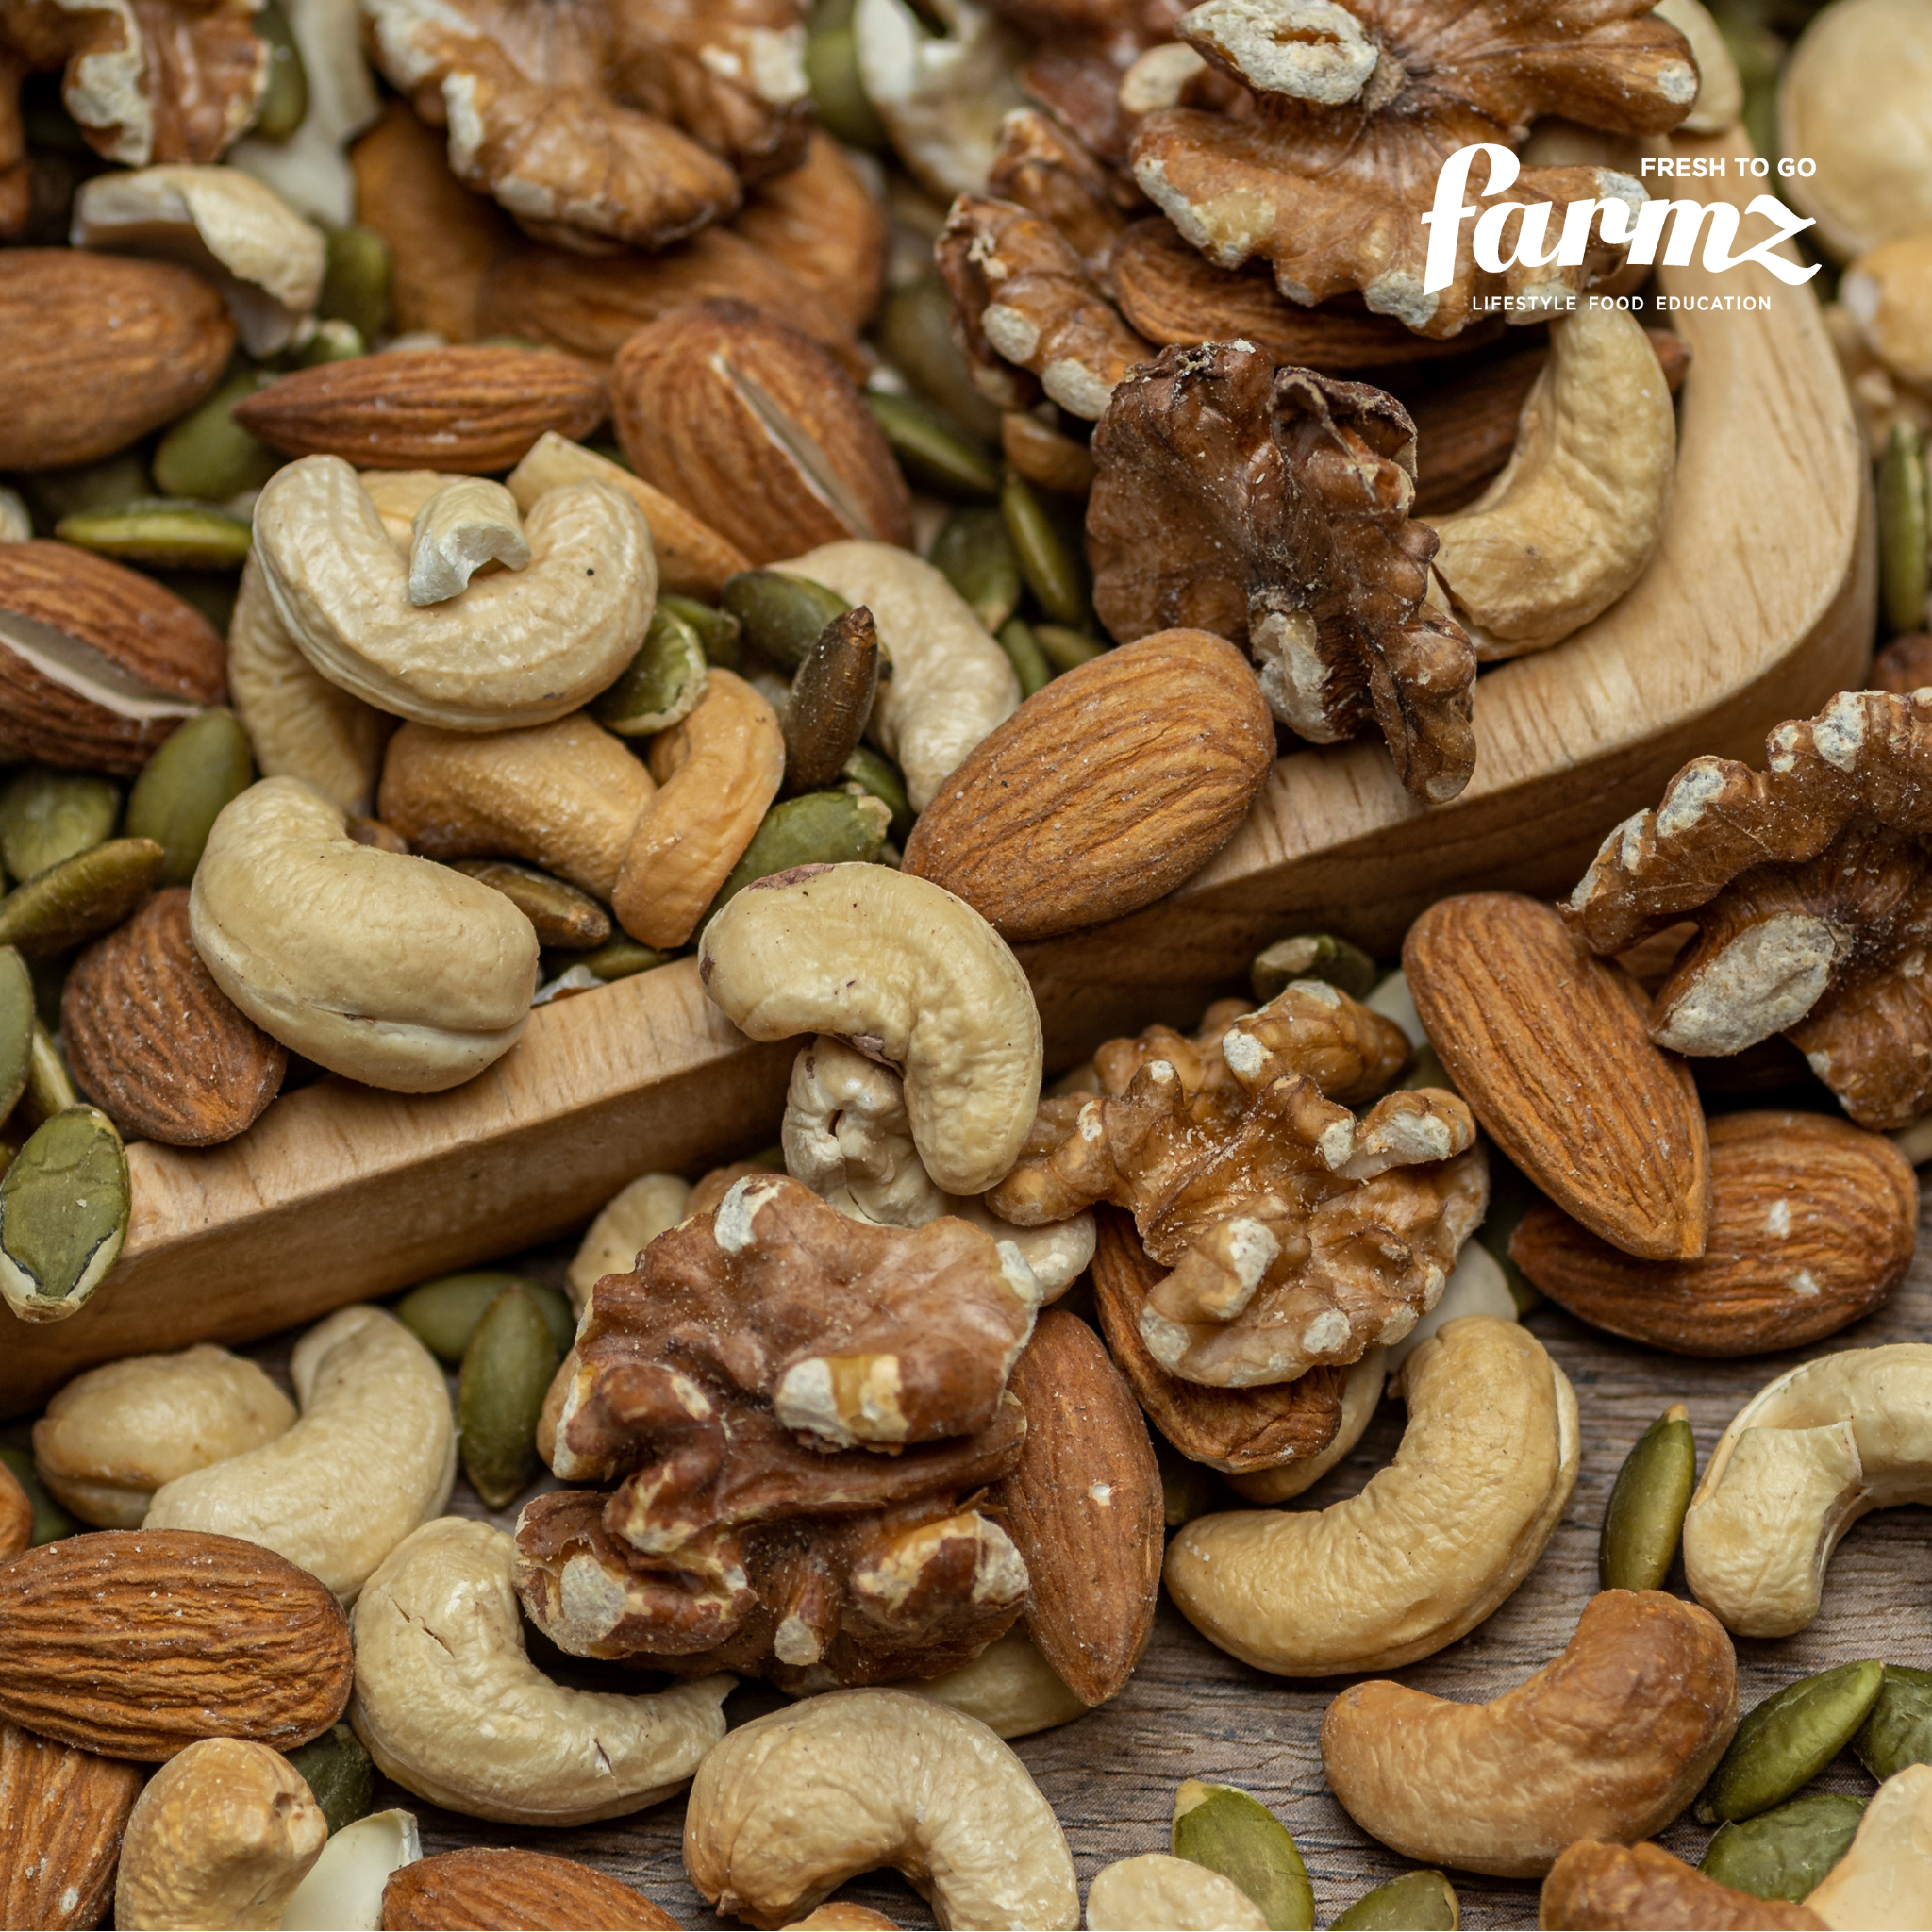 Baked Mixed Nuts, Baked Almonds, Baked Cashew nuts, Baked Walnuts, Baked Pumpkin Seeds